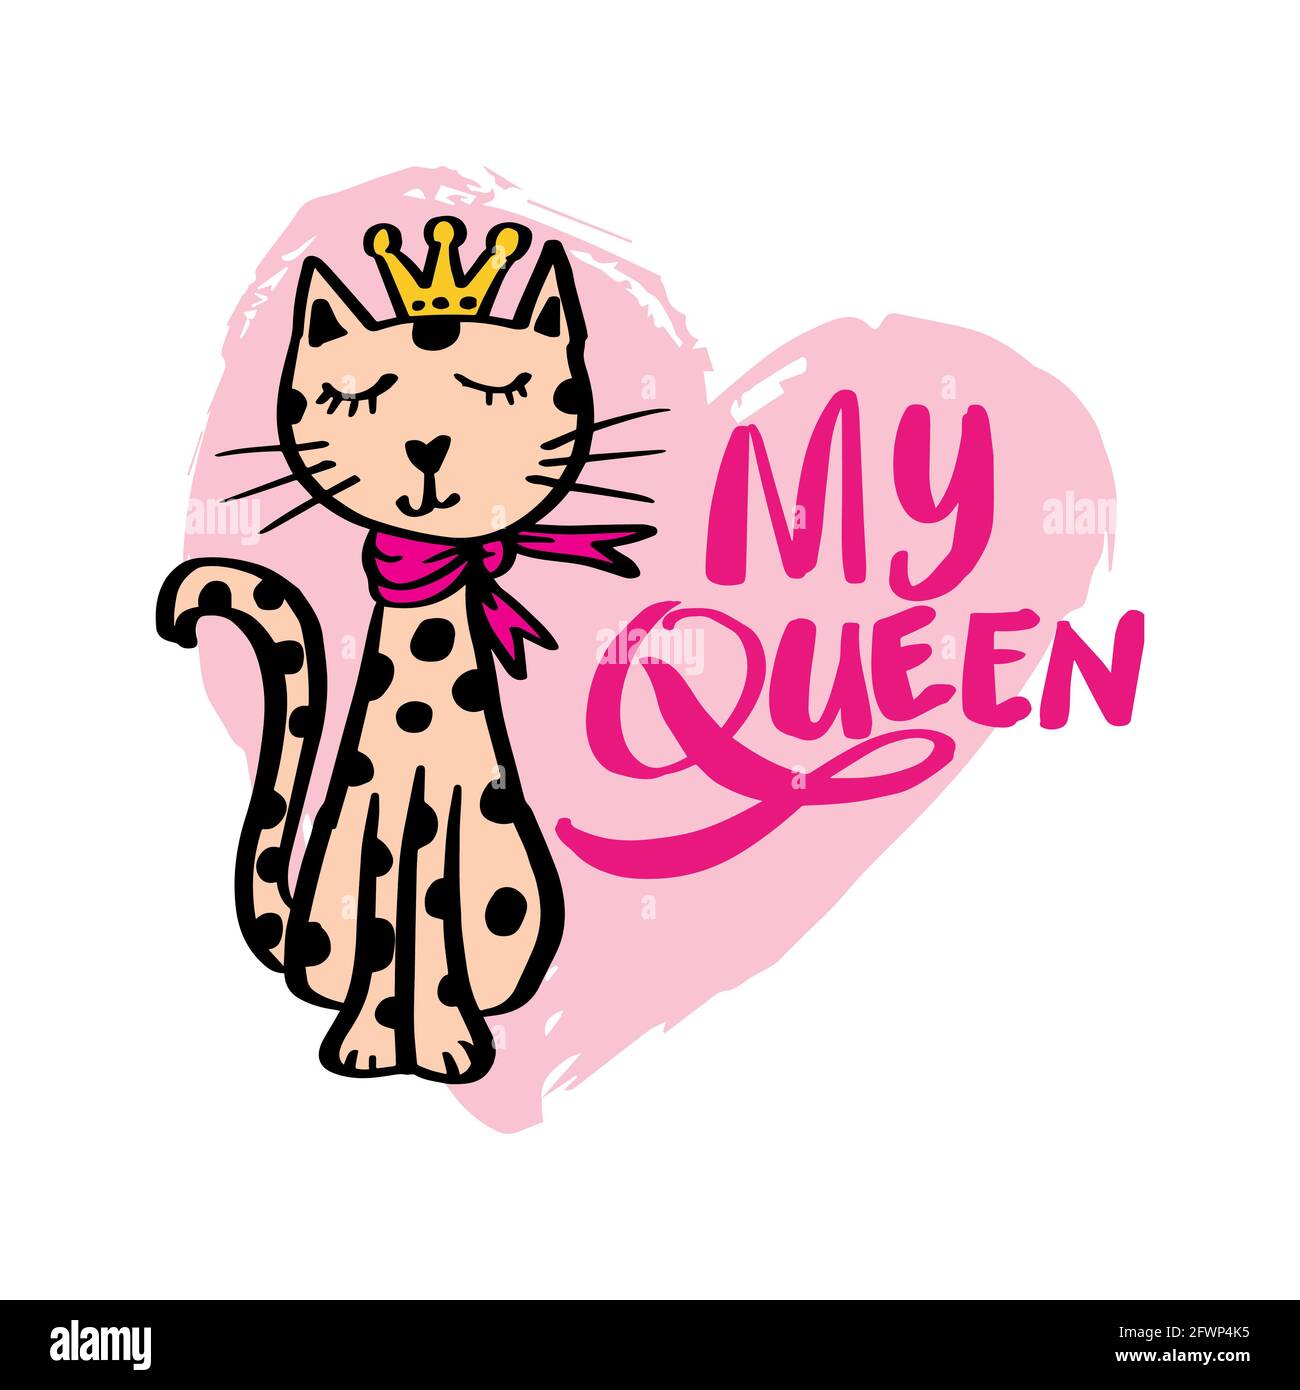 My Queen with hearts hand lettering. Fashion print cat face with crown. Stock Photo